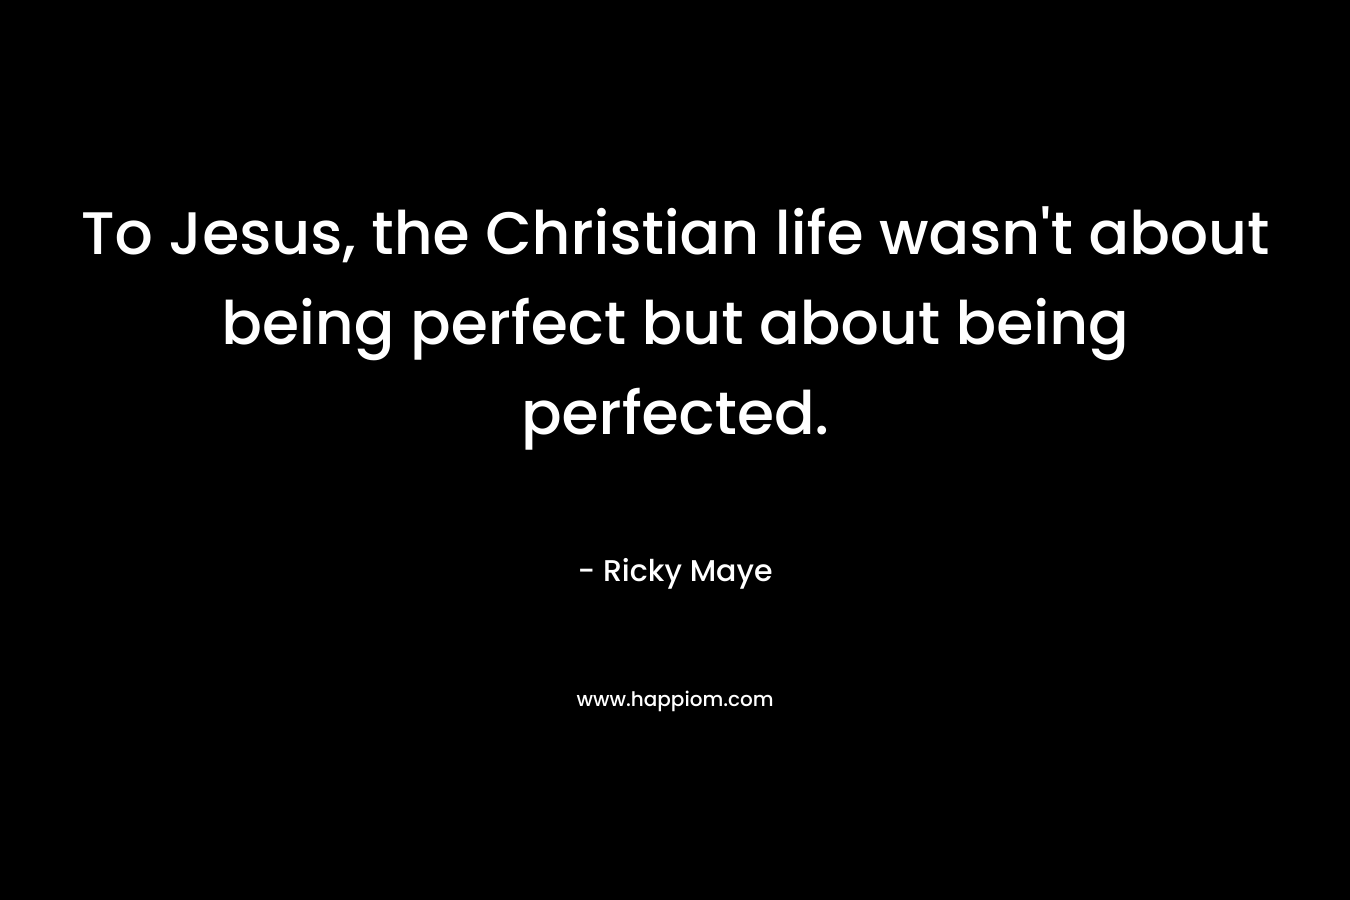 To Jesus, the Christian life wasn’t about being perfect but about being perfected. – Ricky Maye